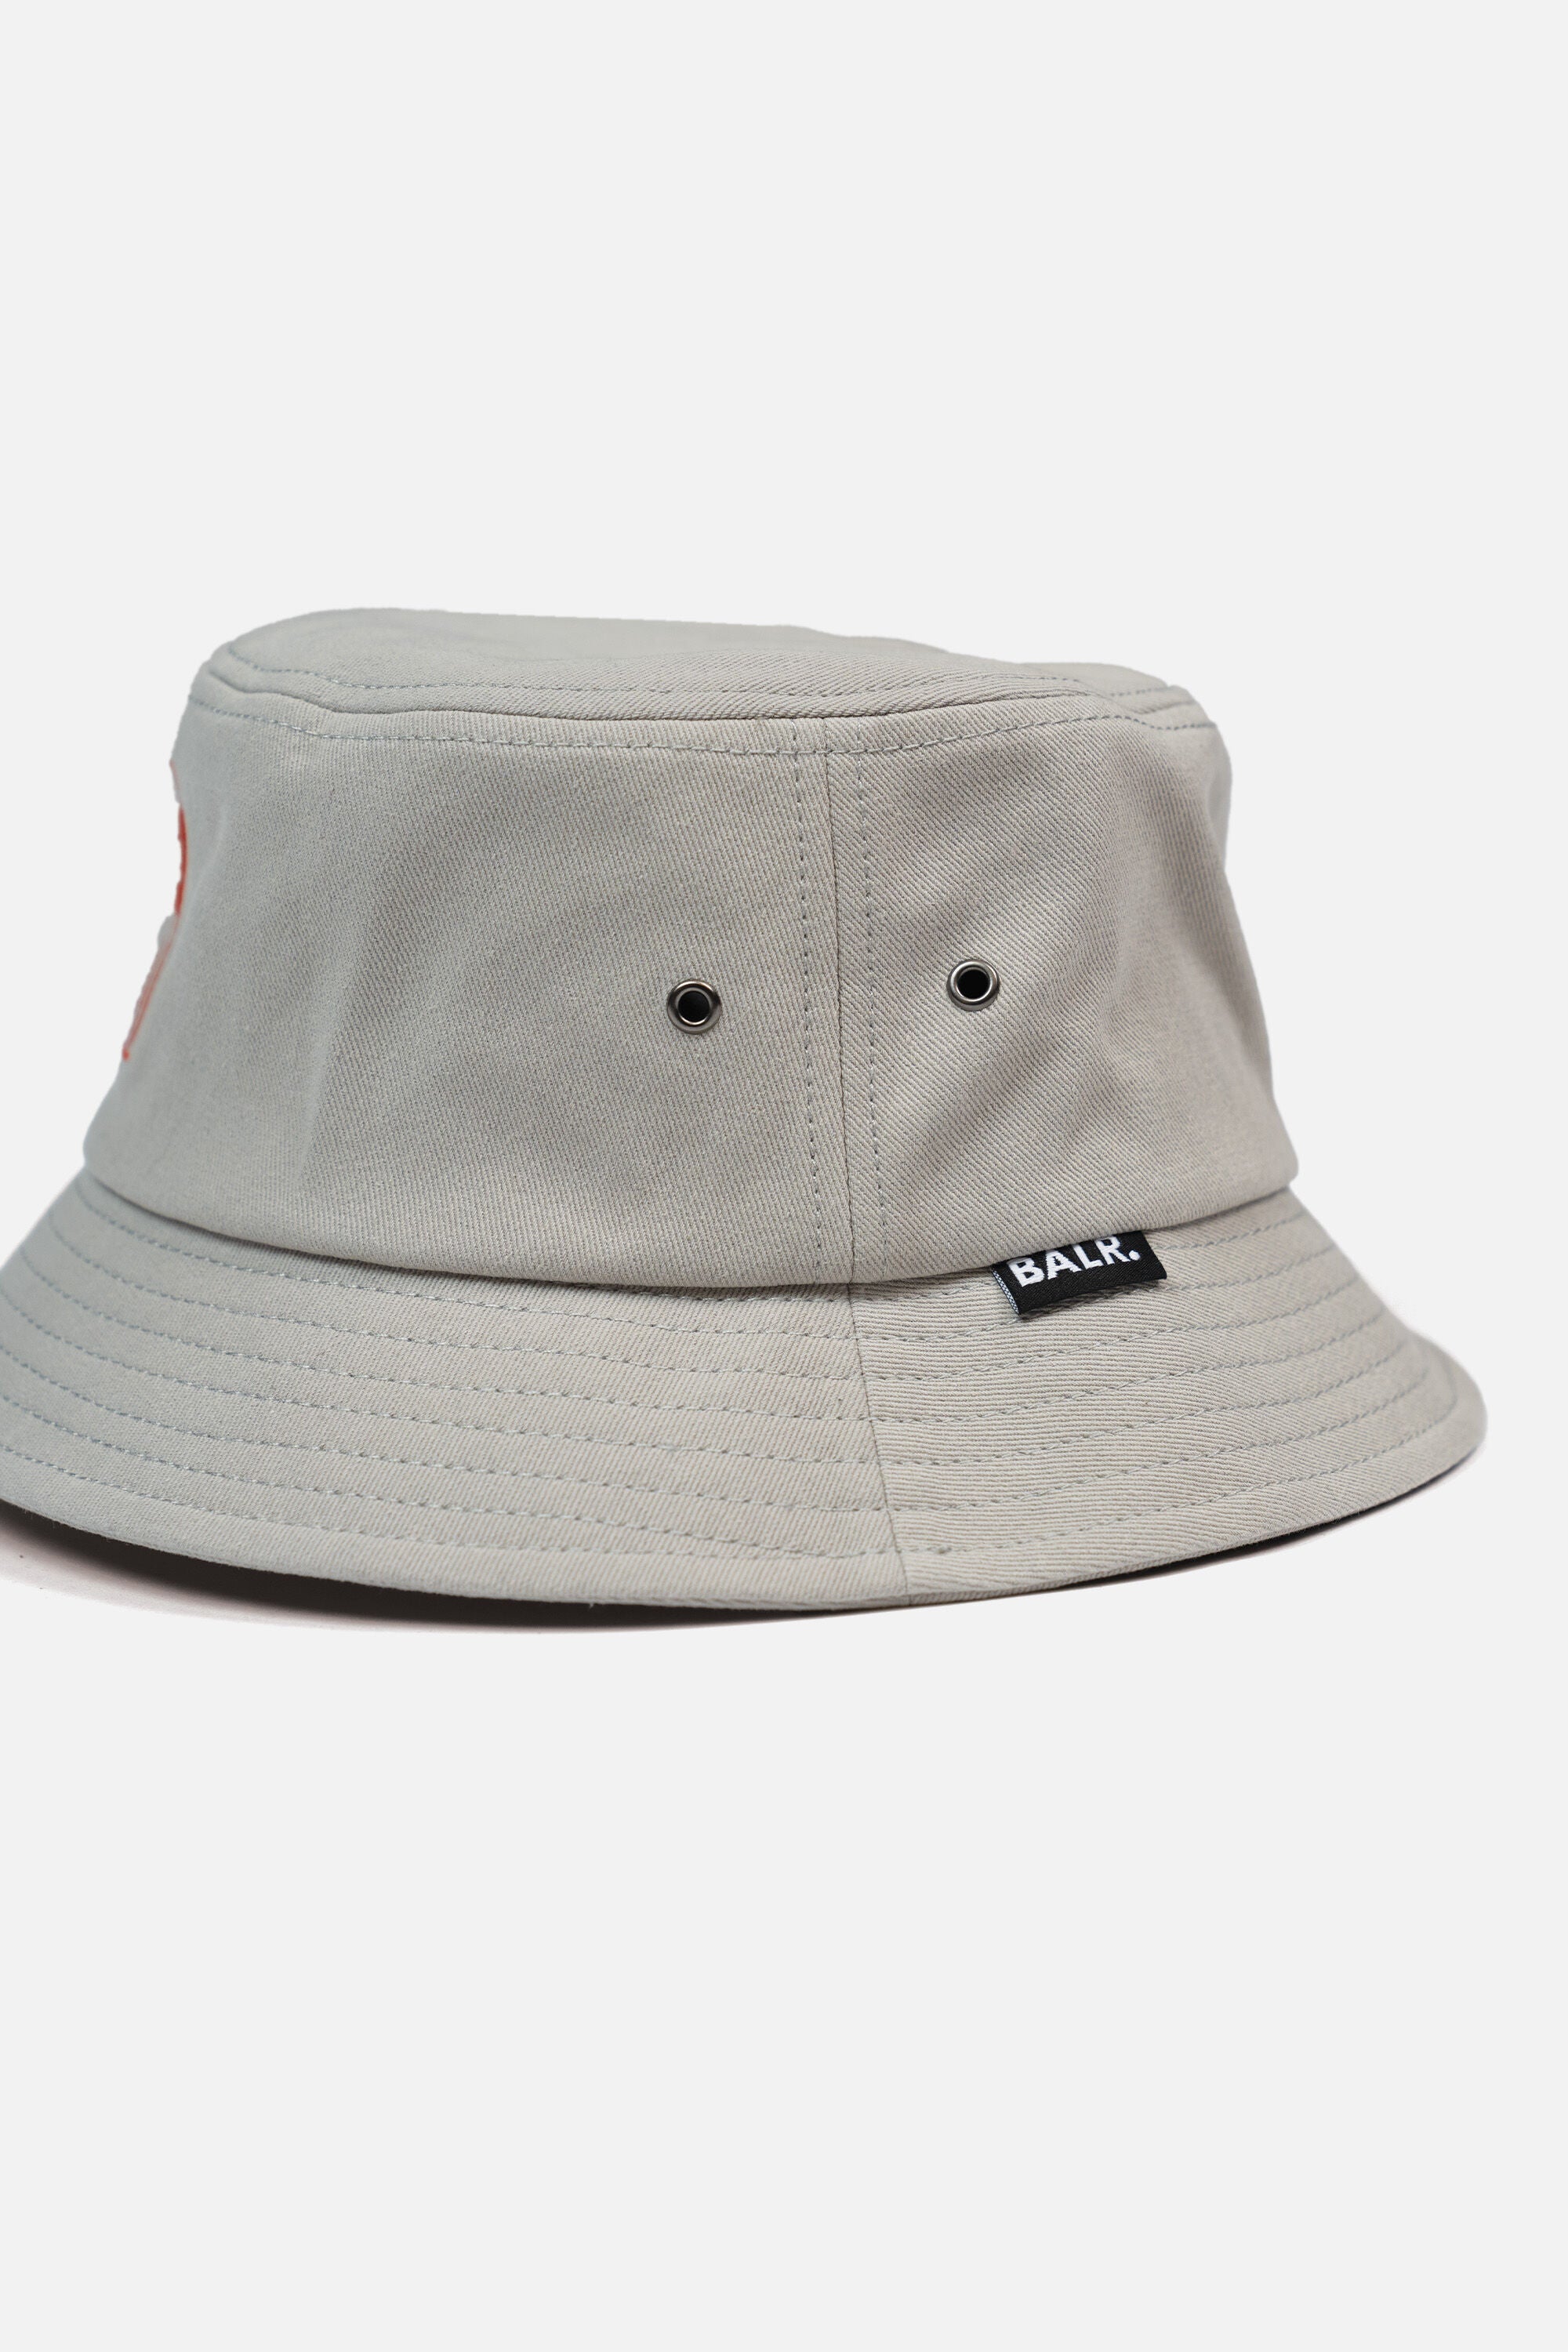 The Wall Bucket Hat Silver Lining